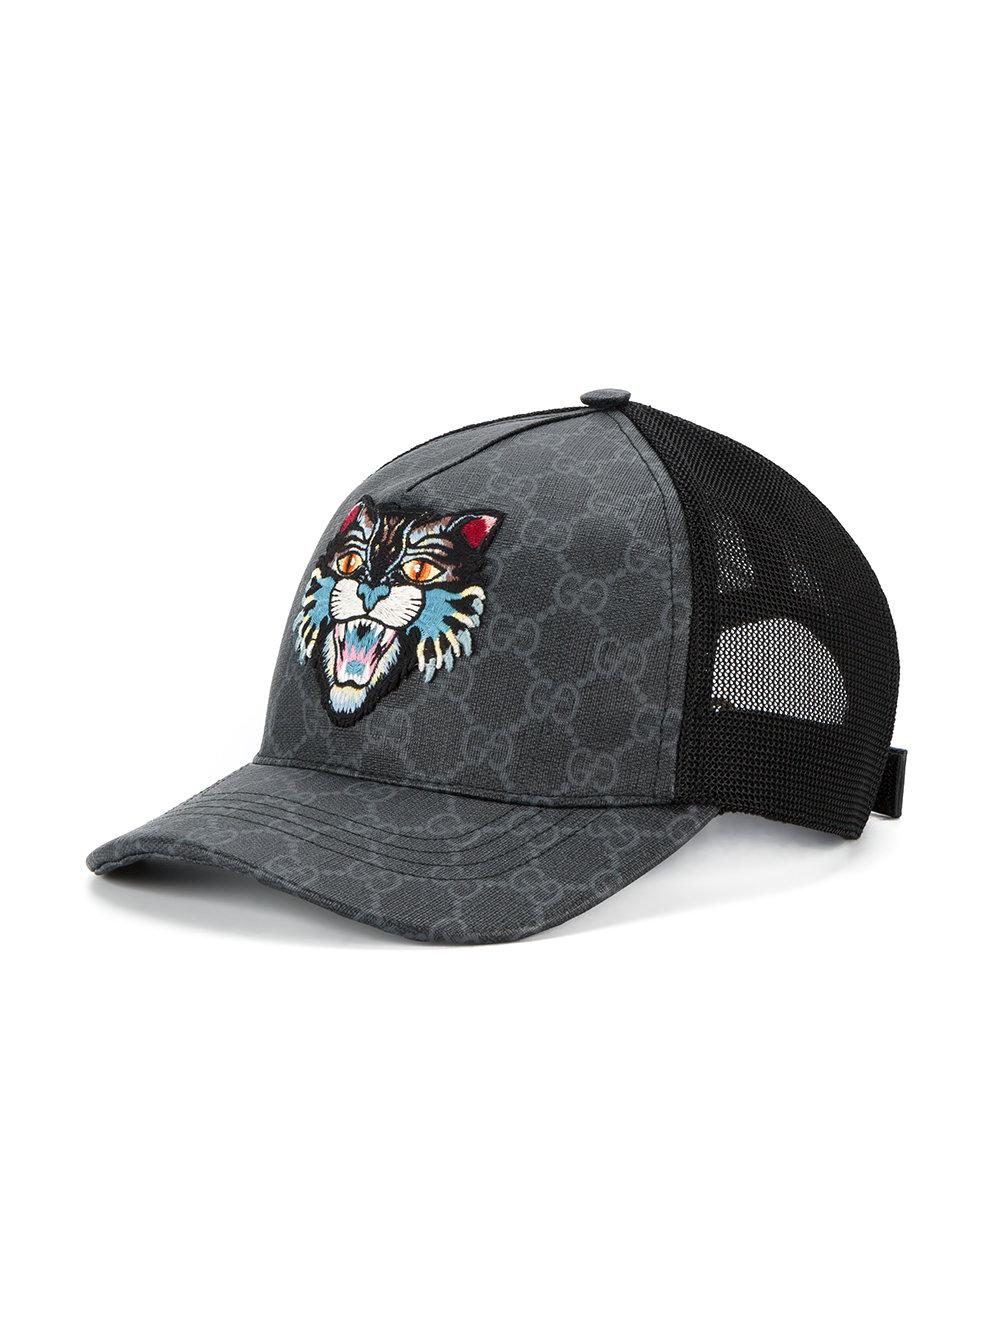 Gucci Cotton Gg Supreme Angry Cat Baseball Cap in Black ...